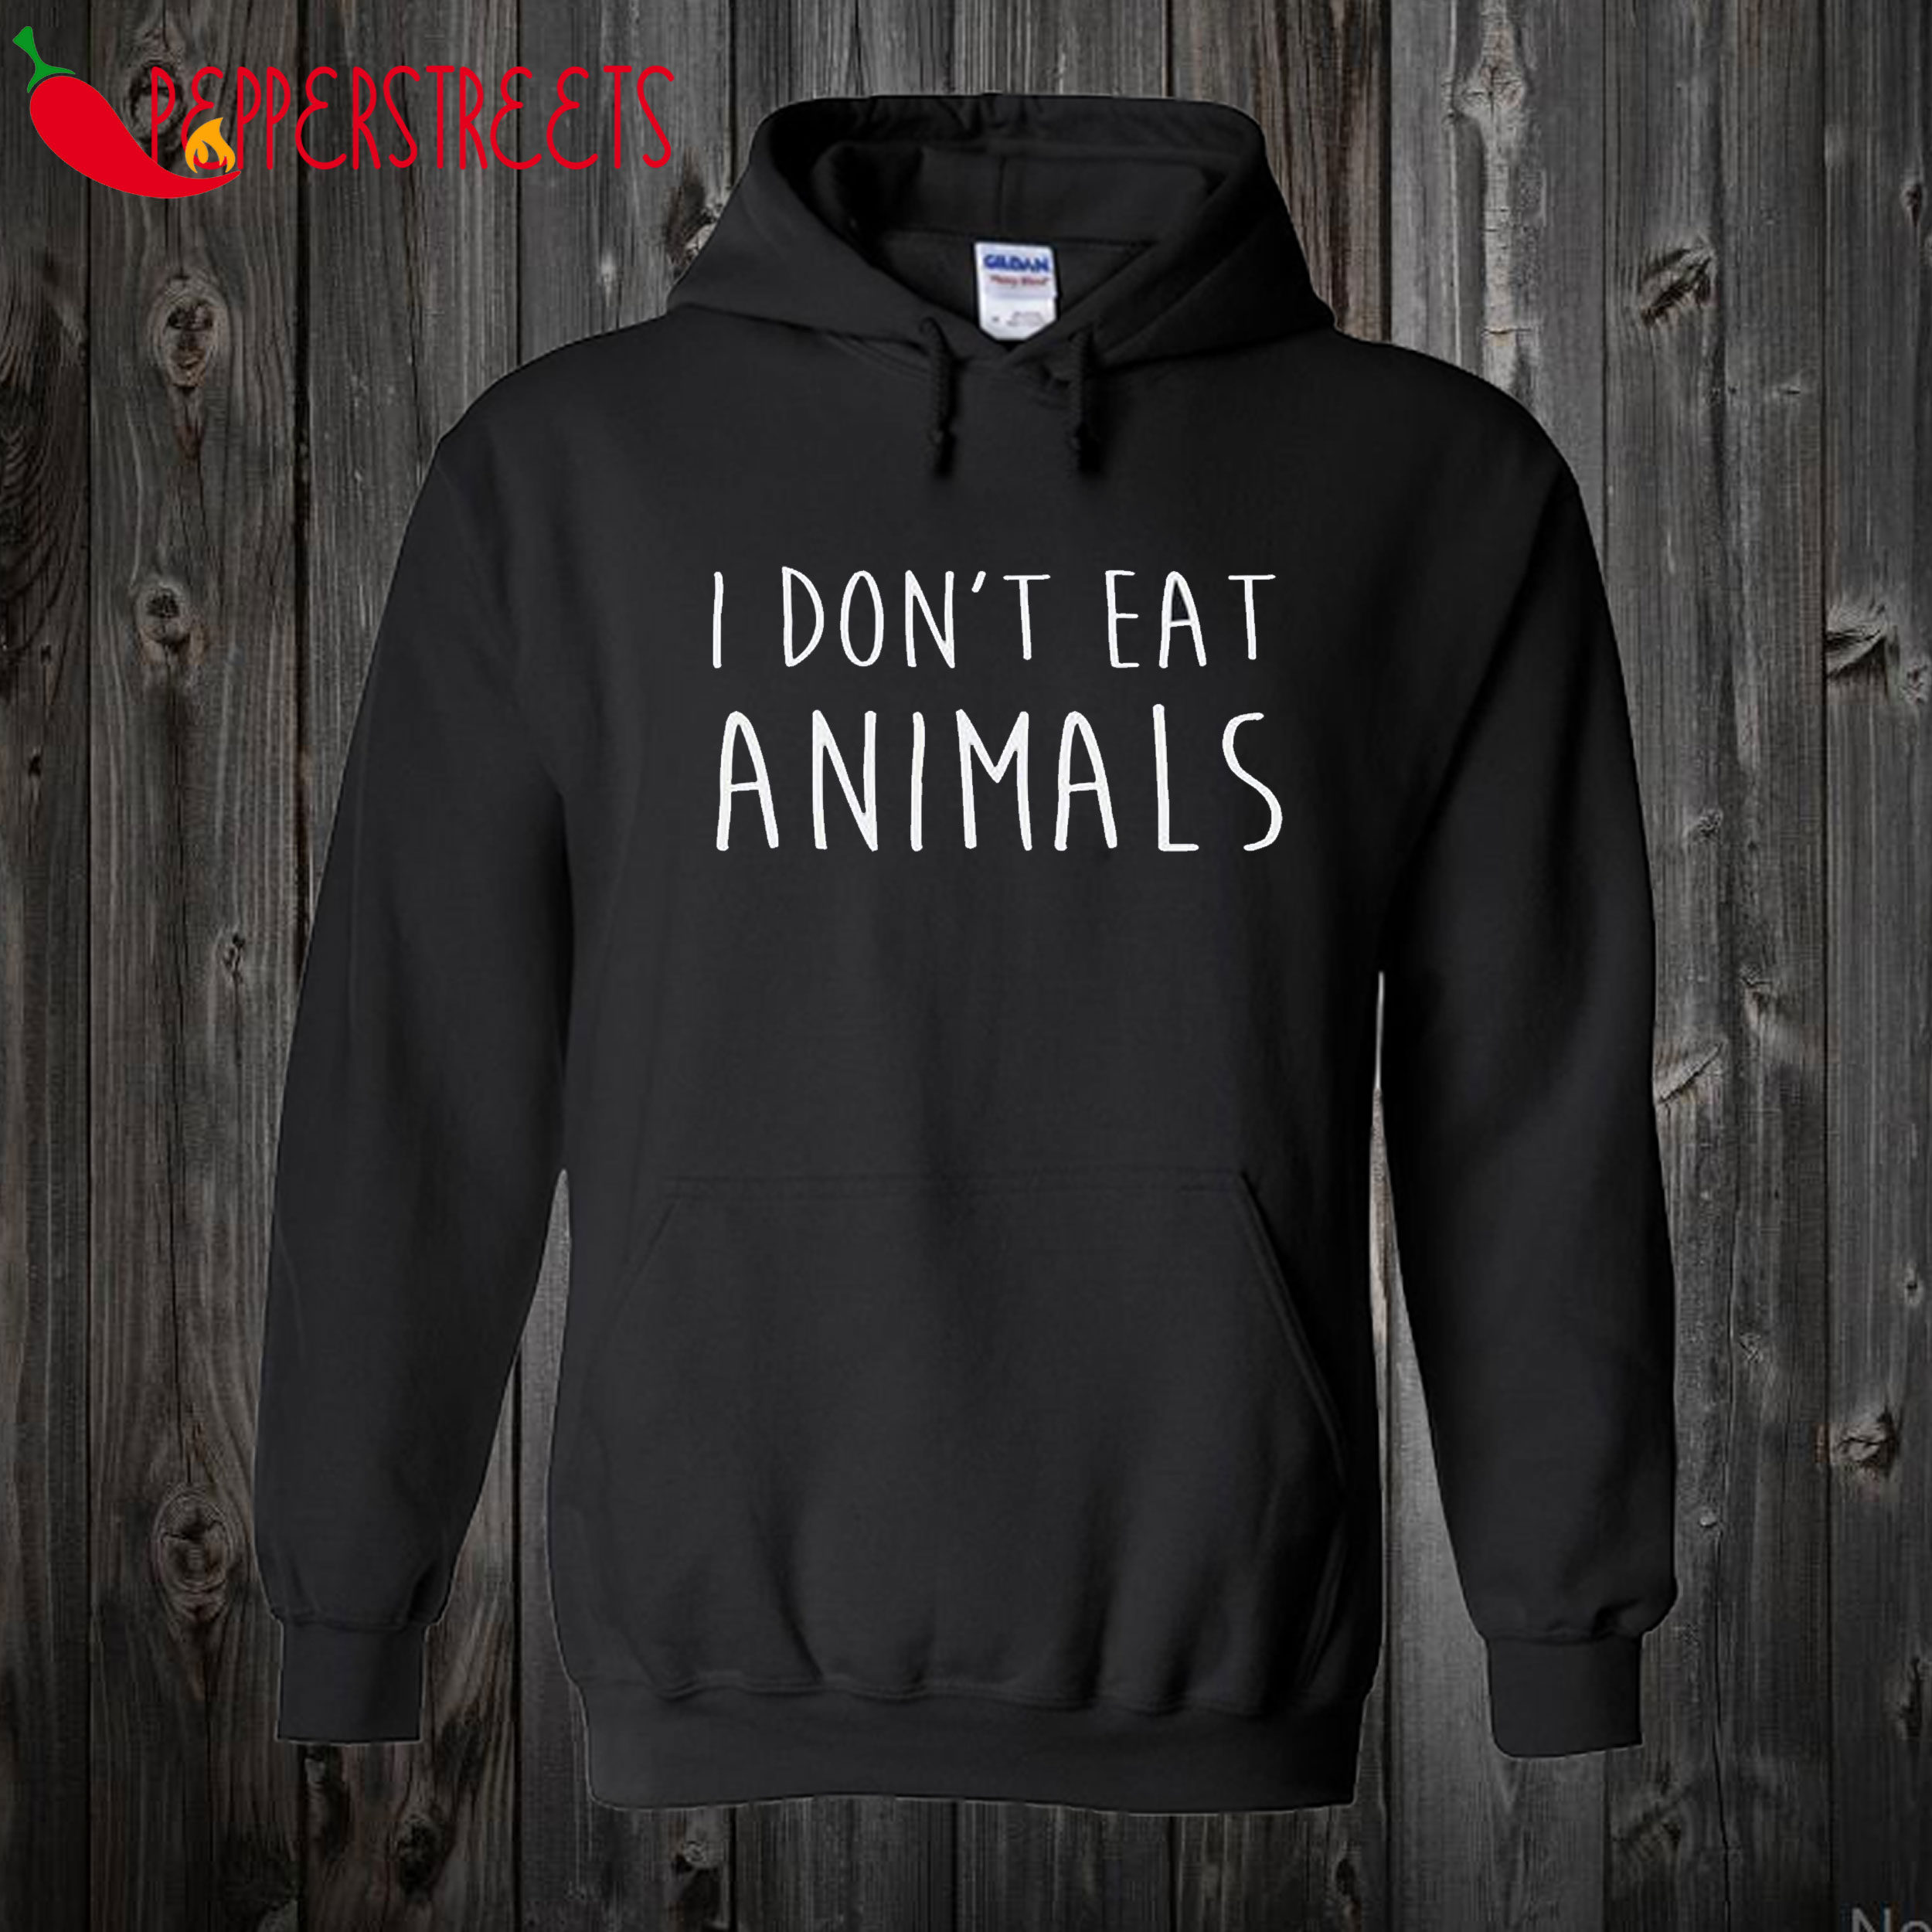 I Don't Eat Animals Hoodie